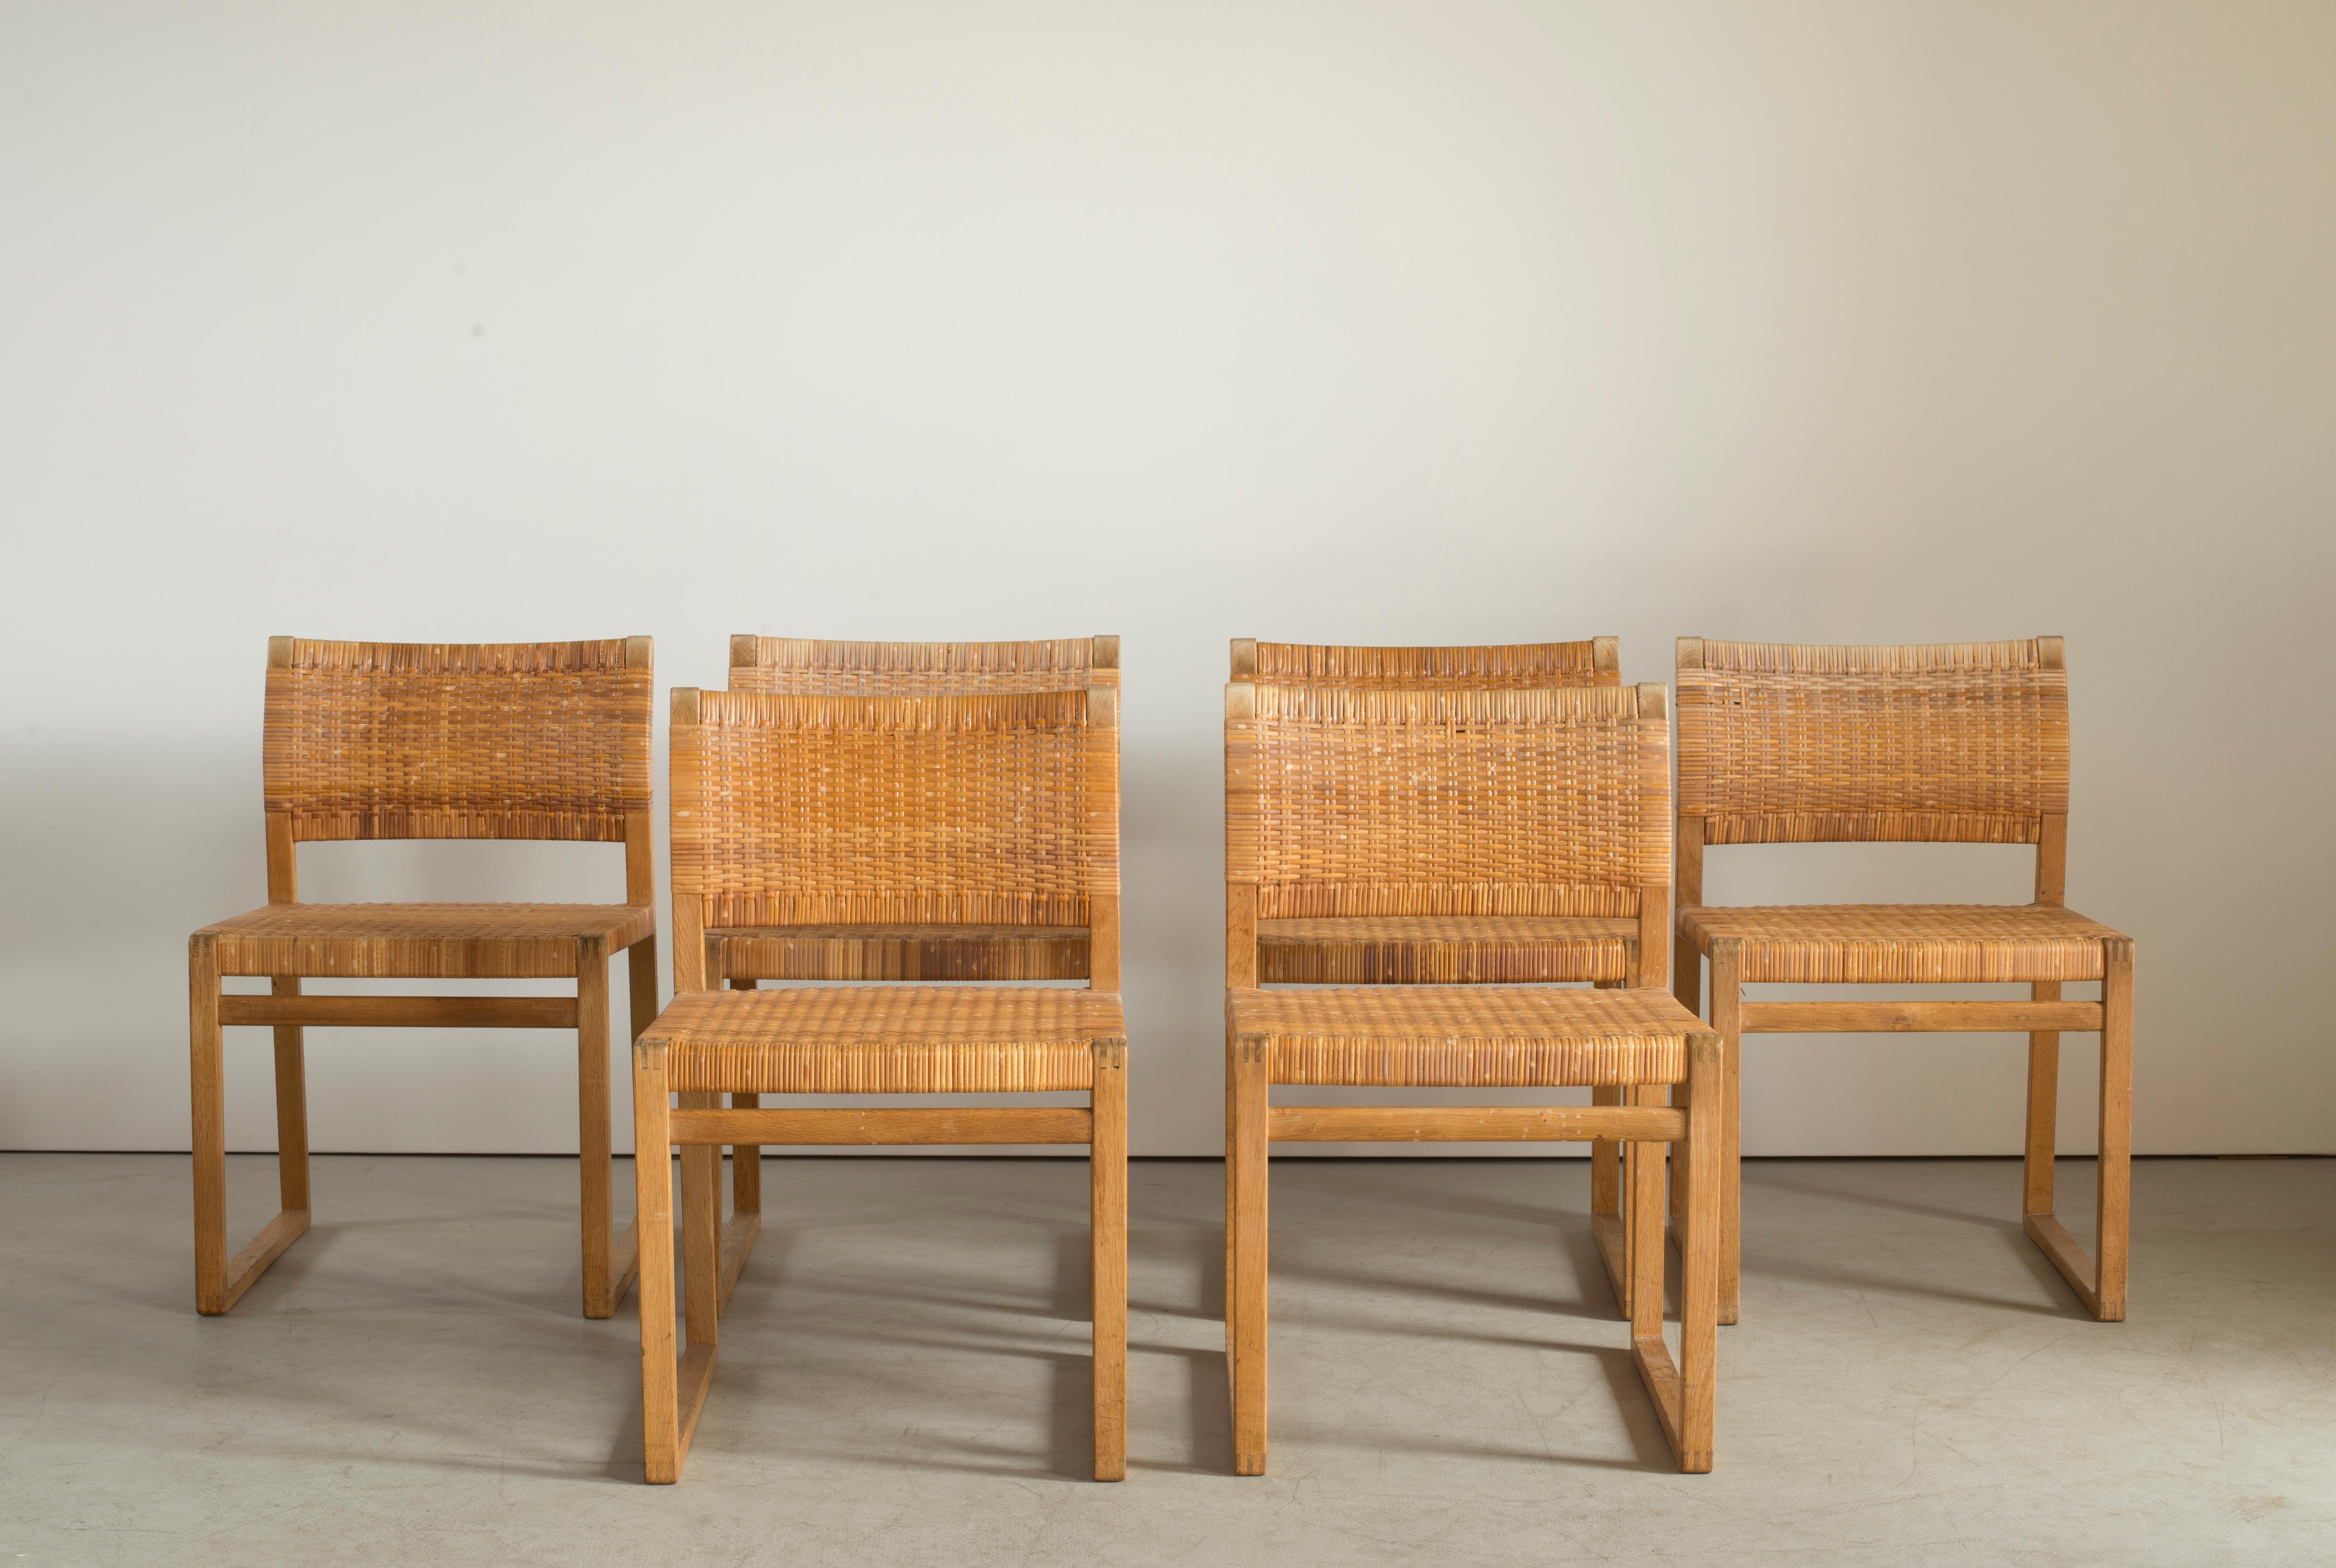 Børge Mogensen set of six chairs of oak and cane. Executed by P. Lauritzen & Son.